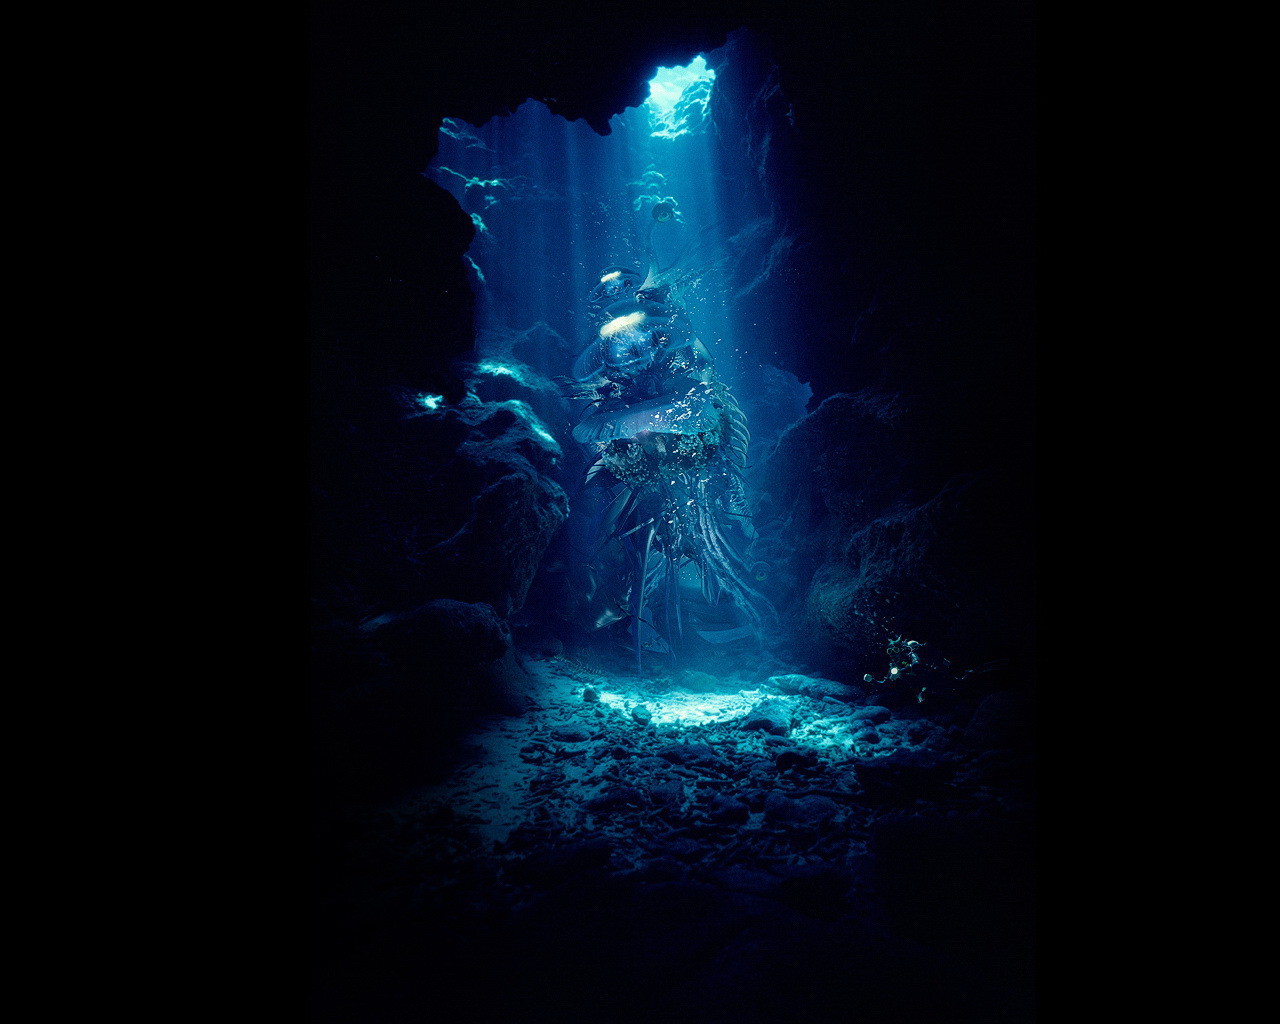 Light in underwater cave wallpapers and images - wallpapers, pictures ...